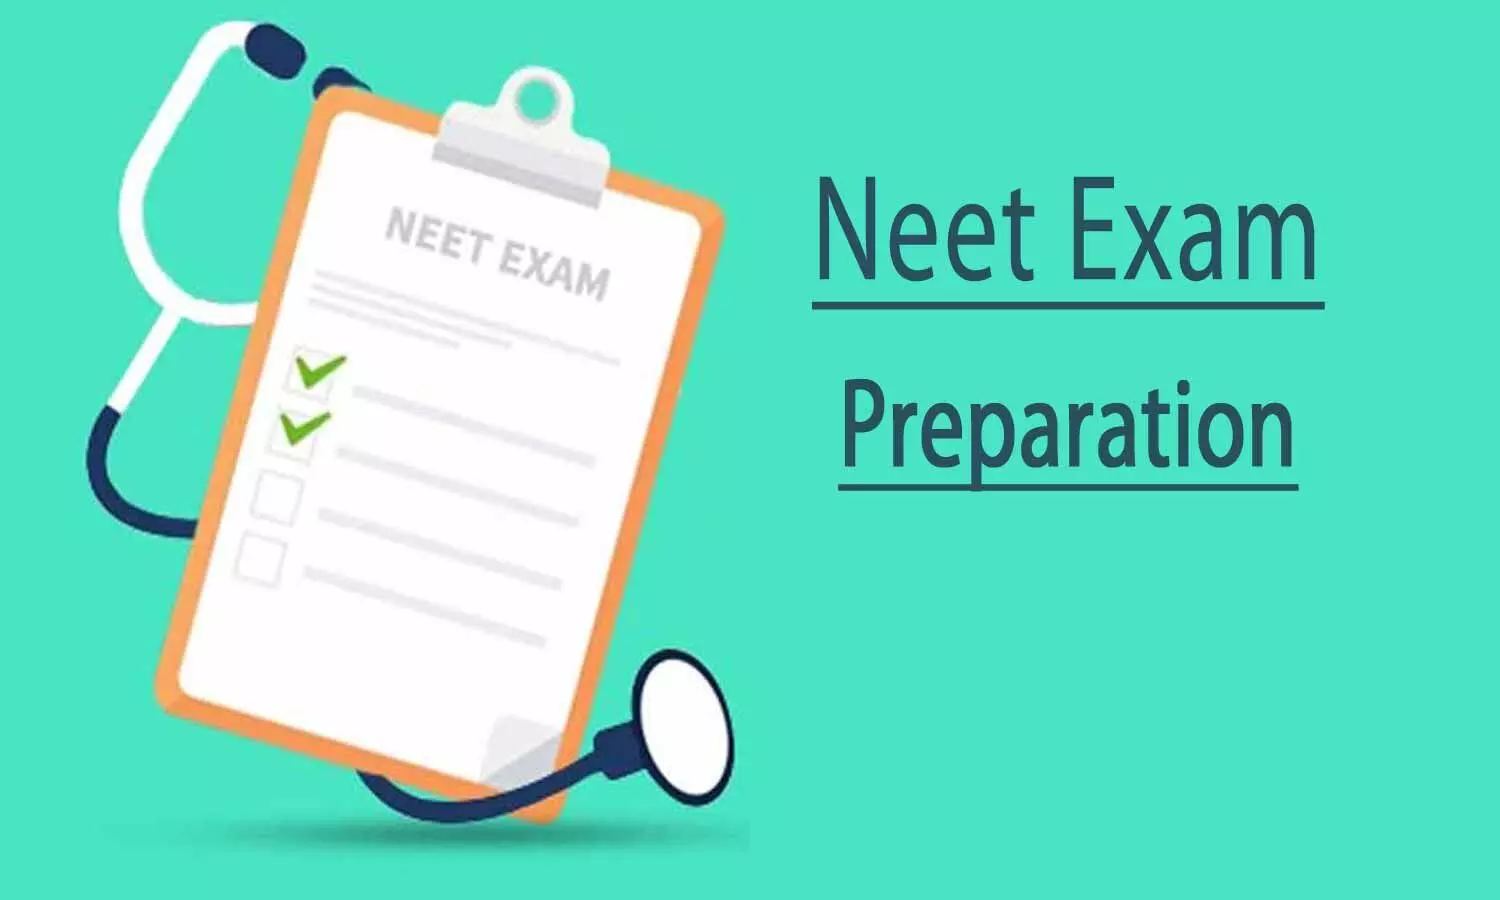 7 Ways To Deal With Stress & Anxiety During NEET Exam Preparation